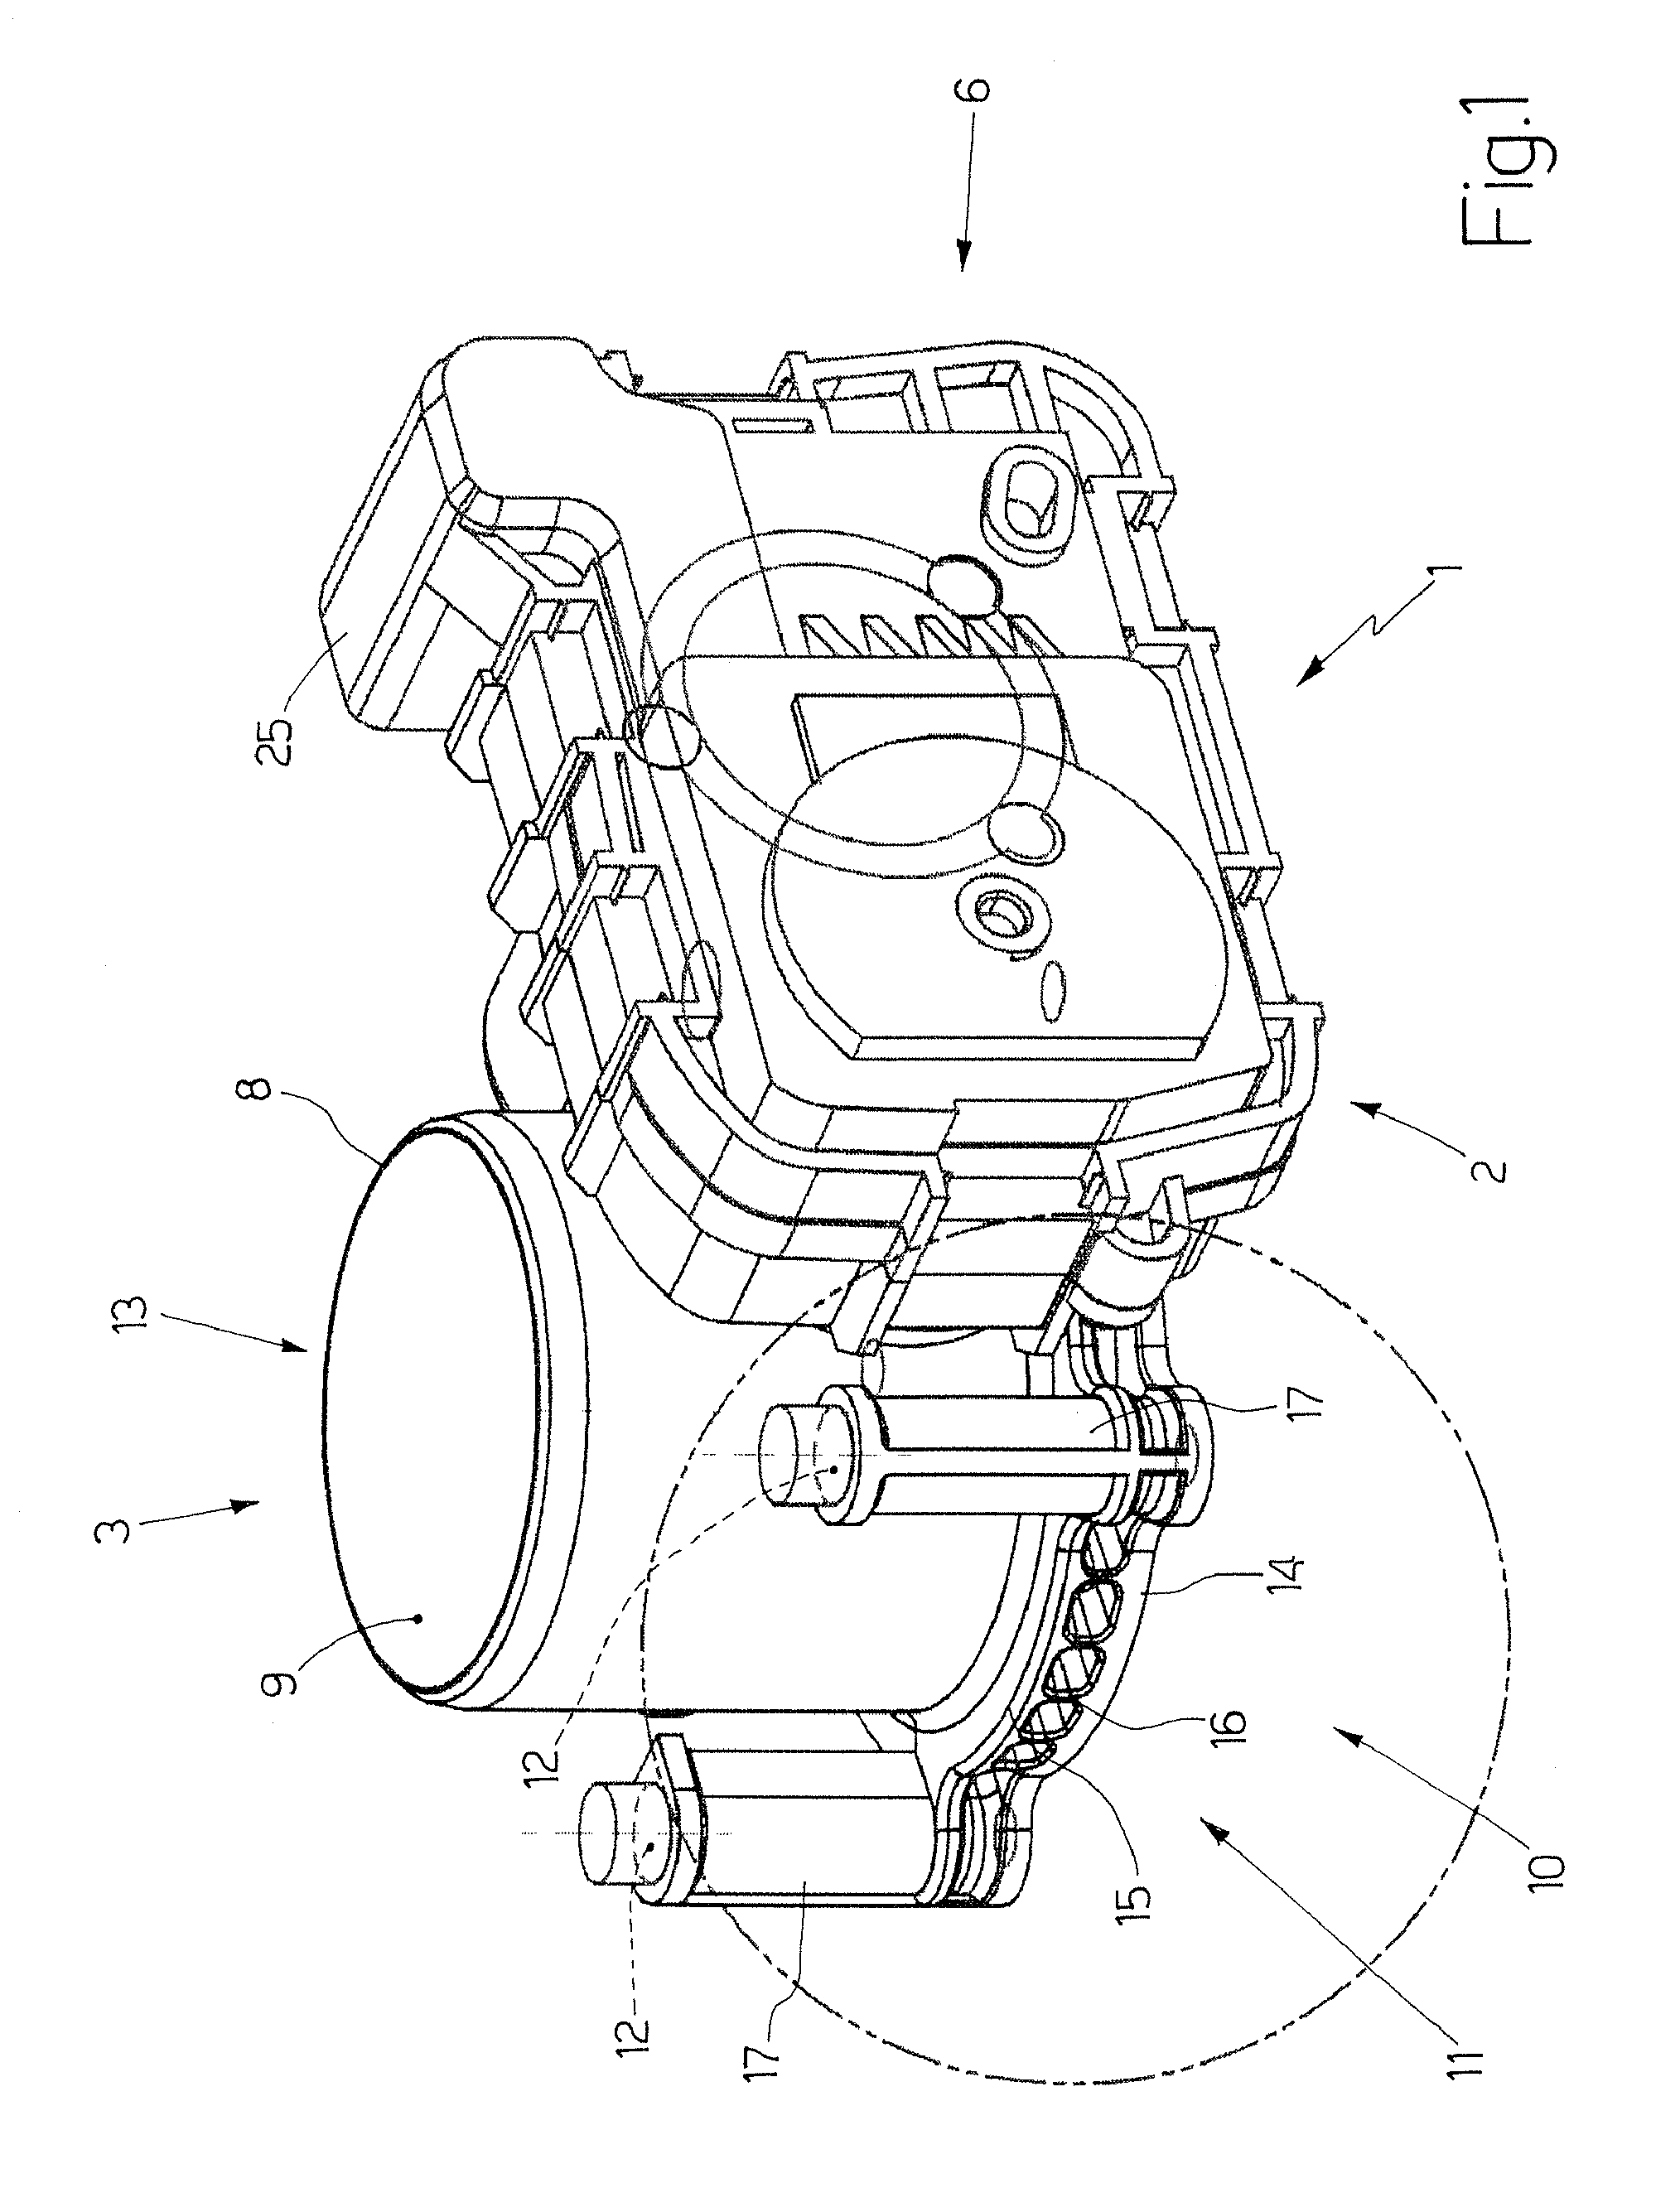 Valve for adjusting the air flow rate in an internal combustion engine